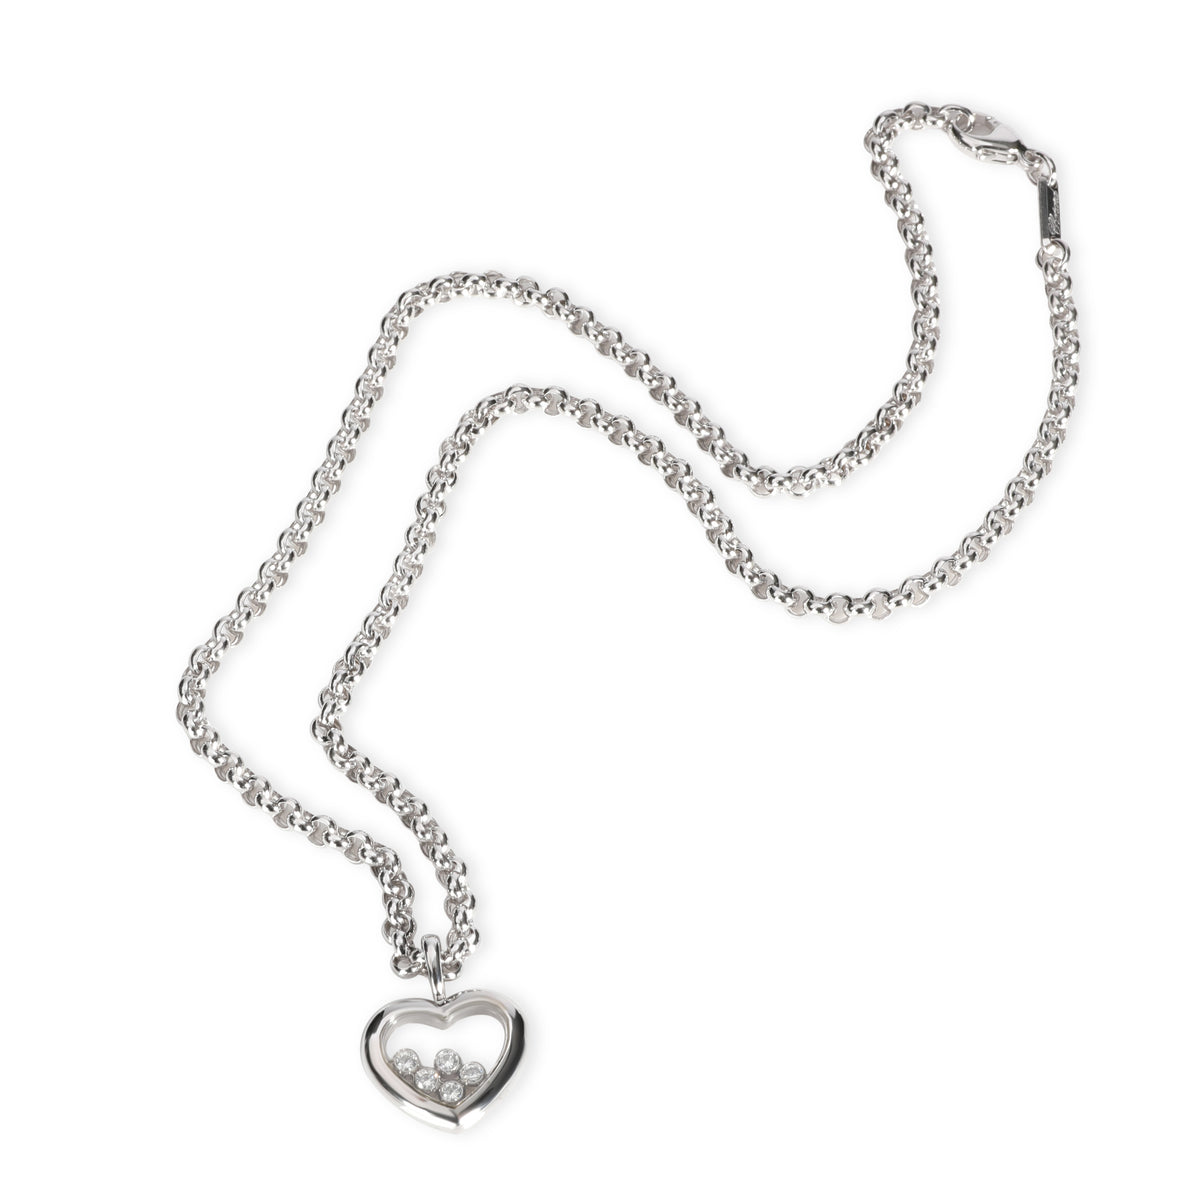 Chopard Happy Diamonds Necklace in 18K White Gold 0.25 CTW